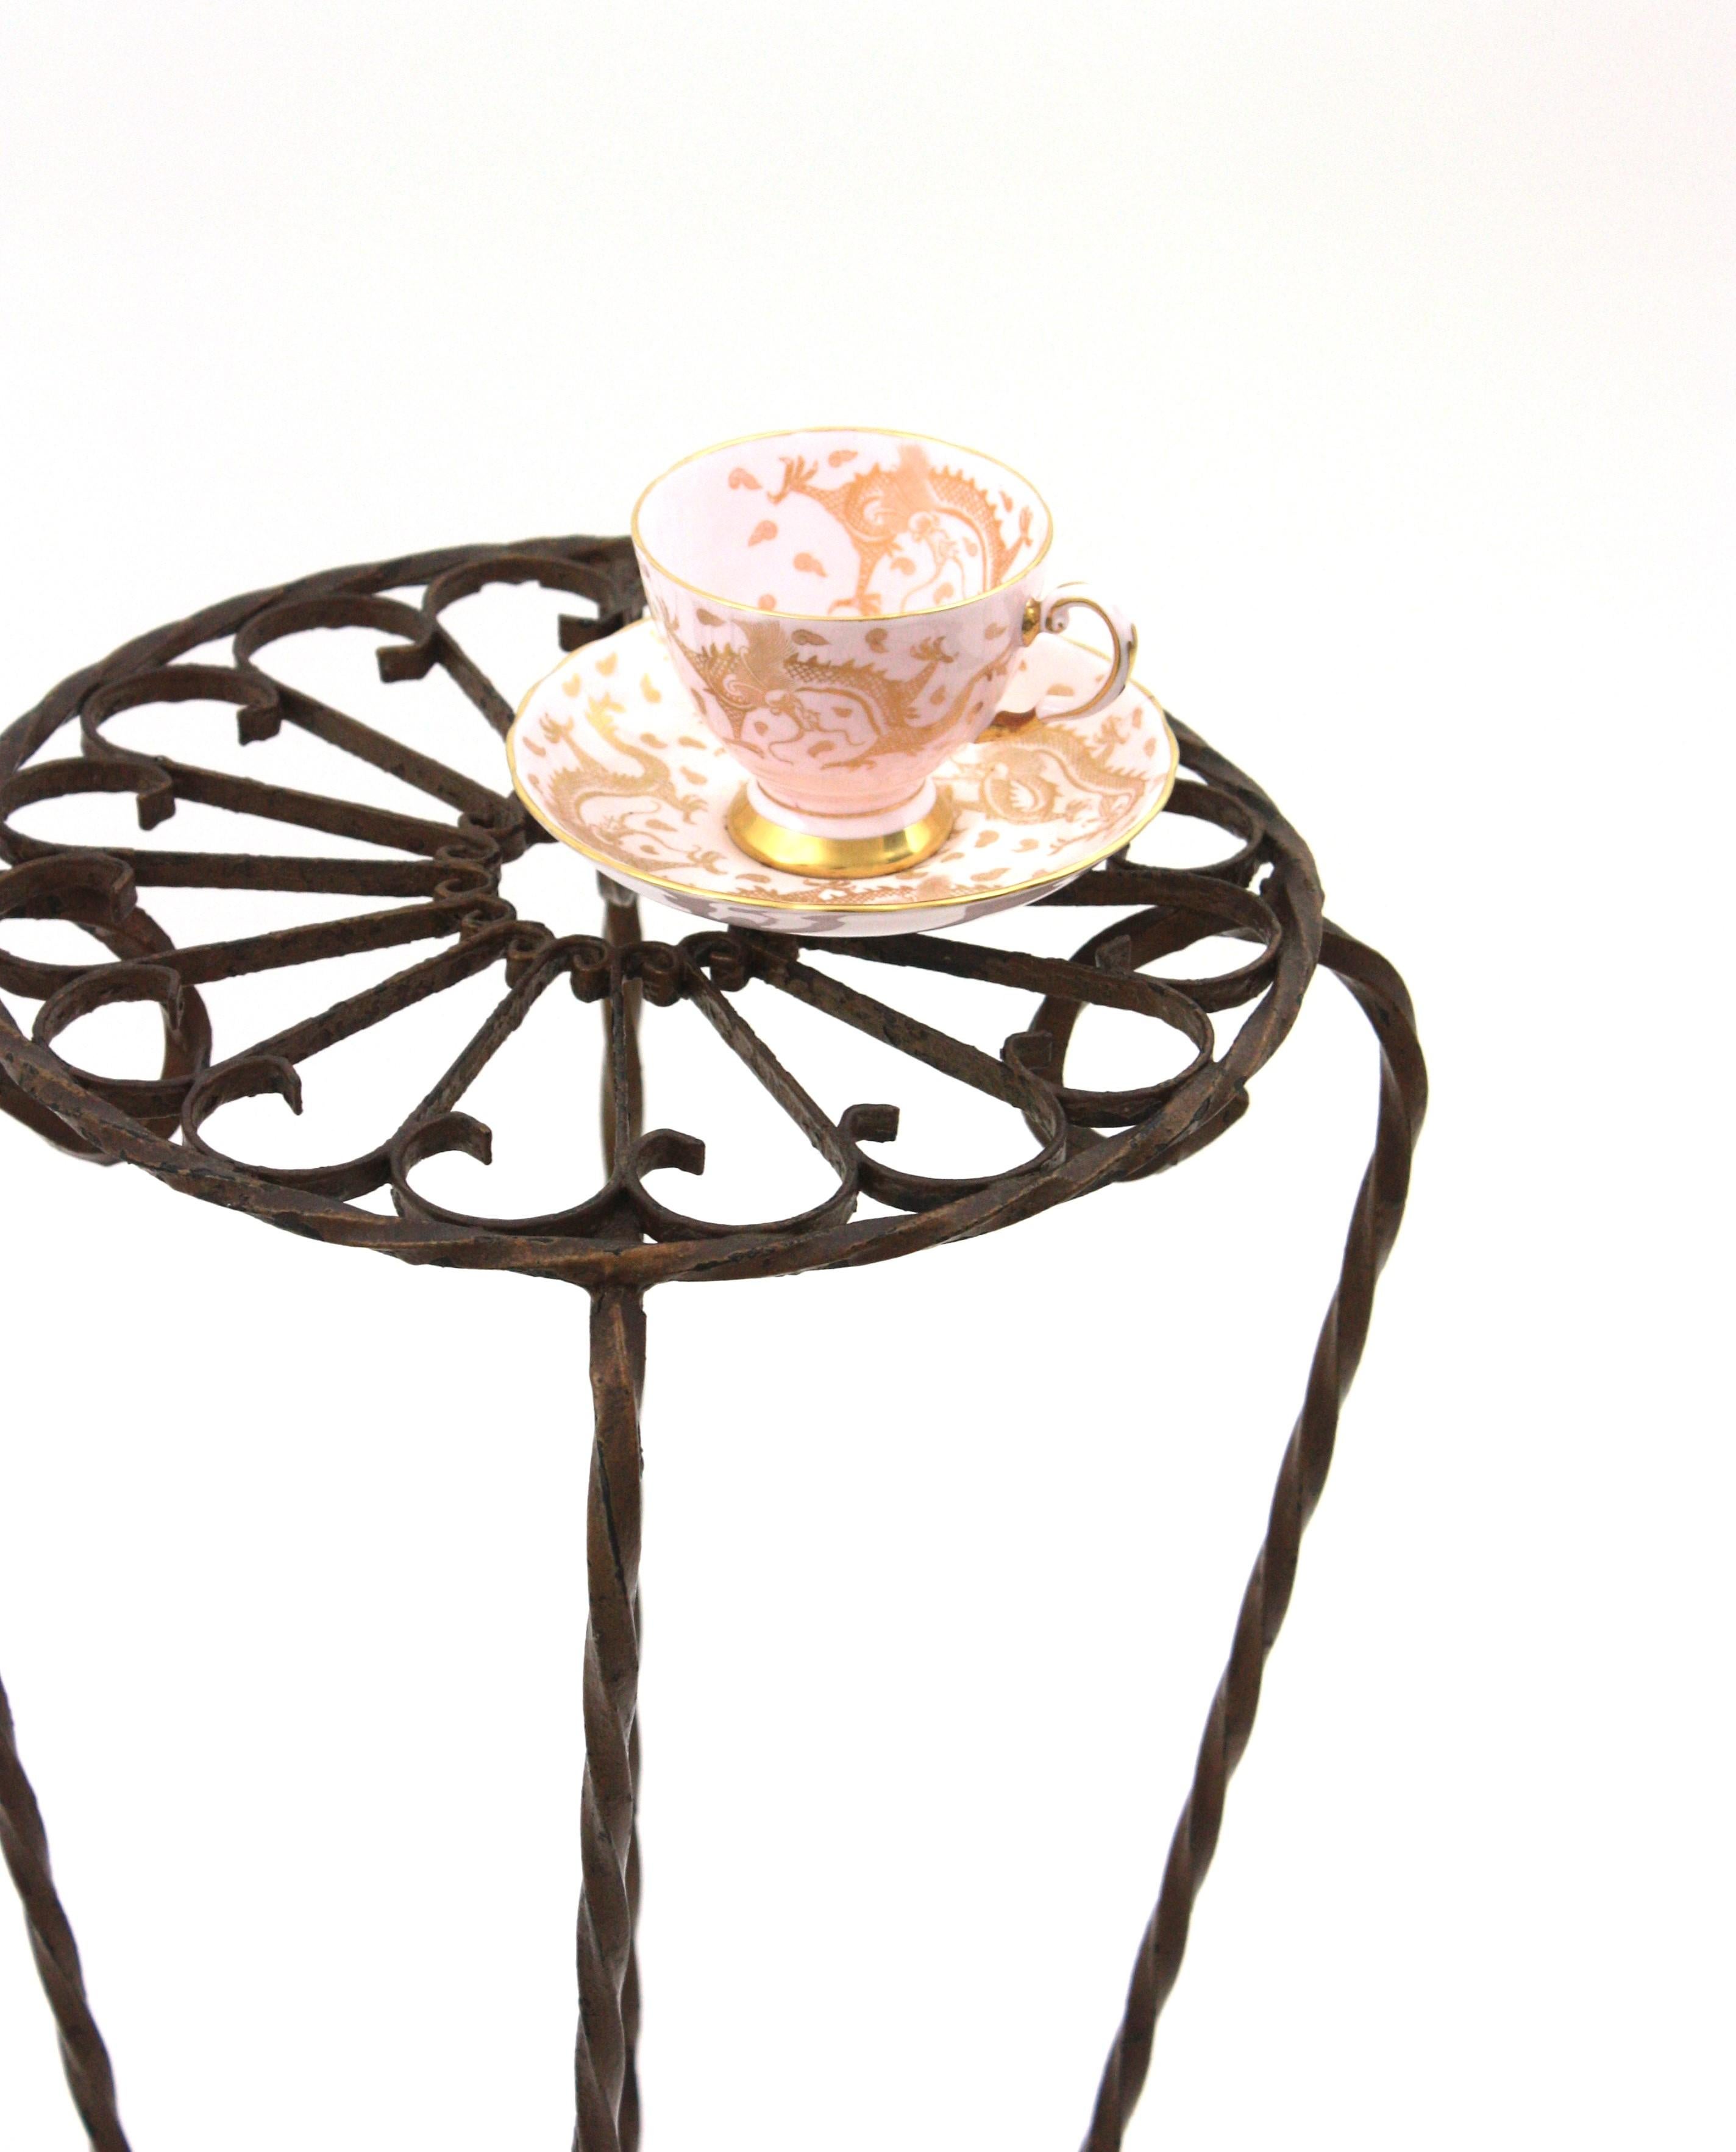 Spanish Scrollwork Wrought Iron Side Table / Drinks Table, 1950s For Sale 8